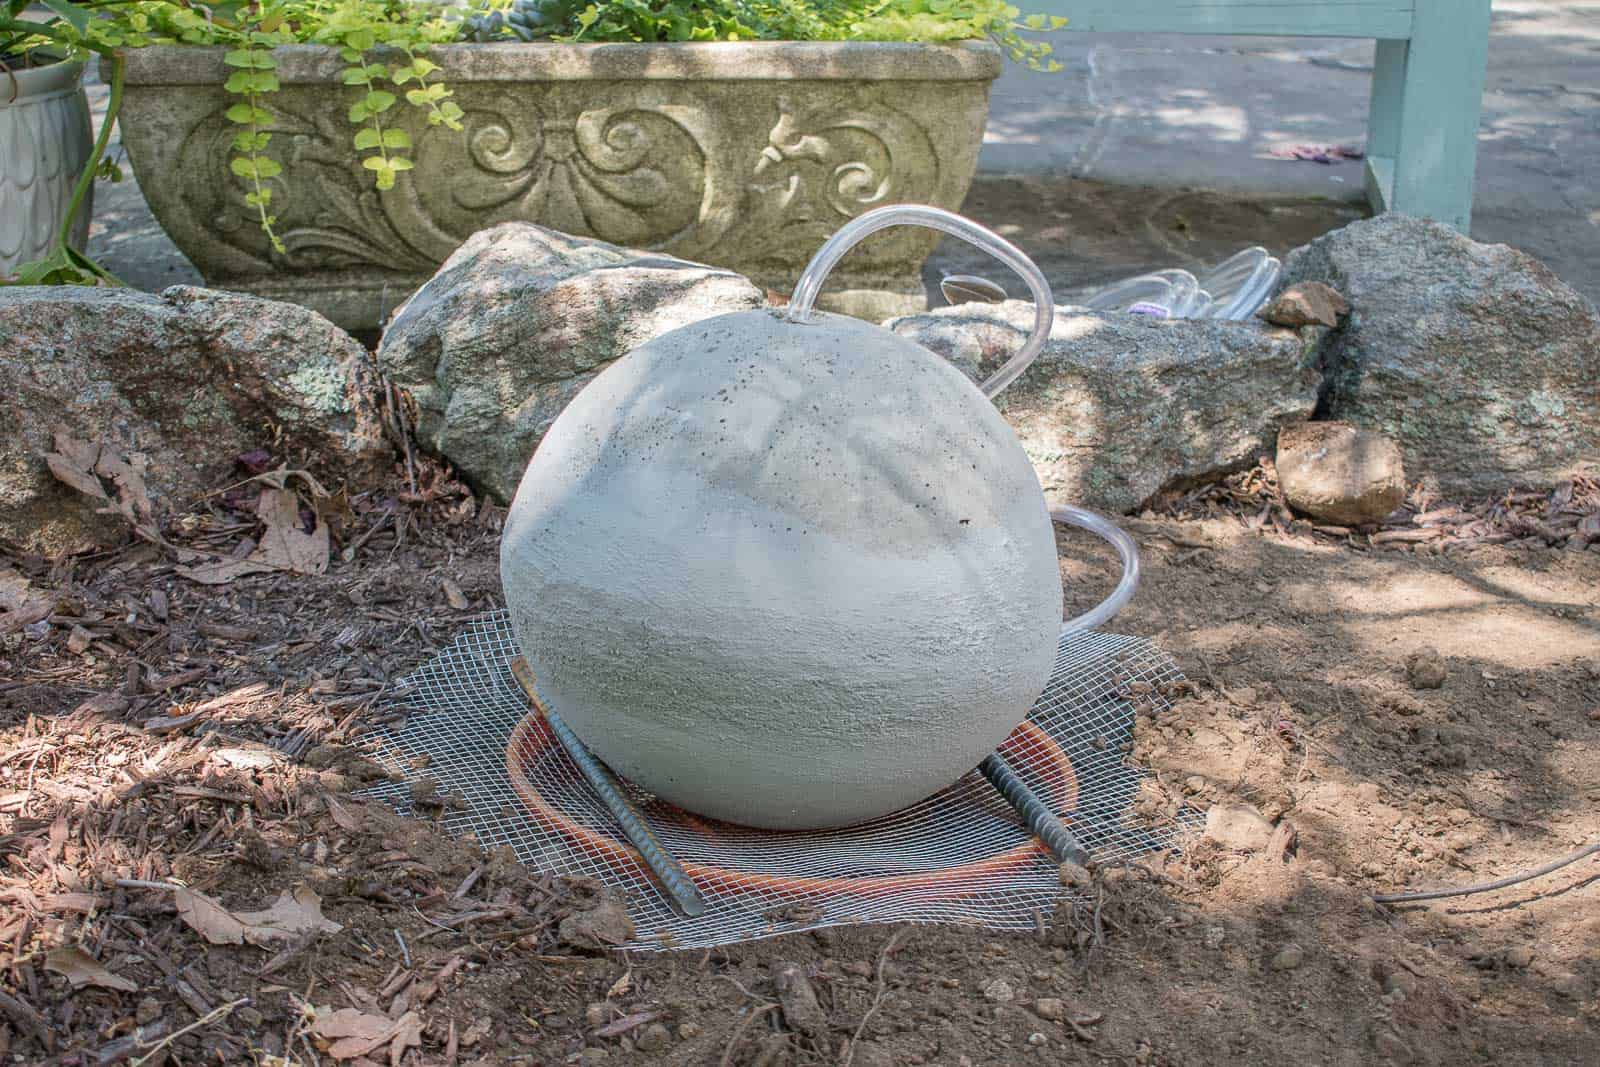 place hardware mesh over the bucket and support fountain with rebar